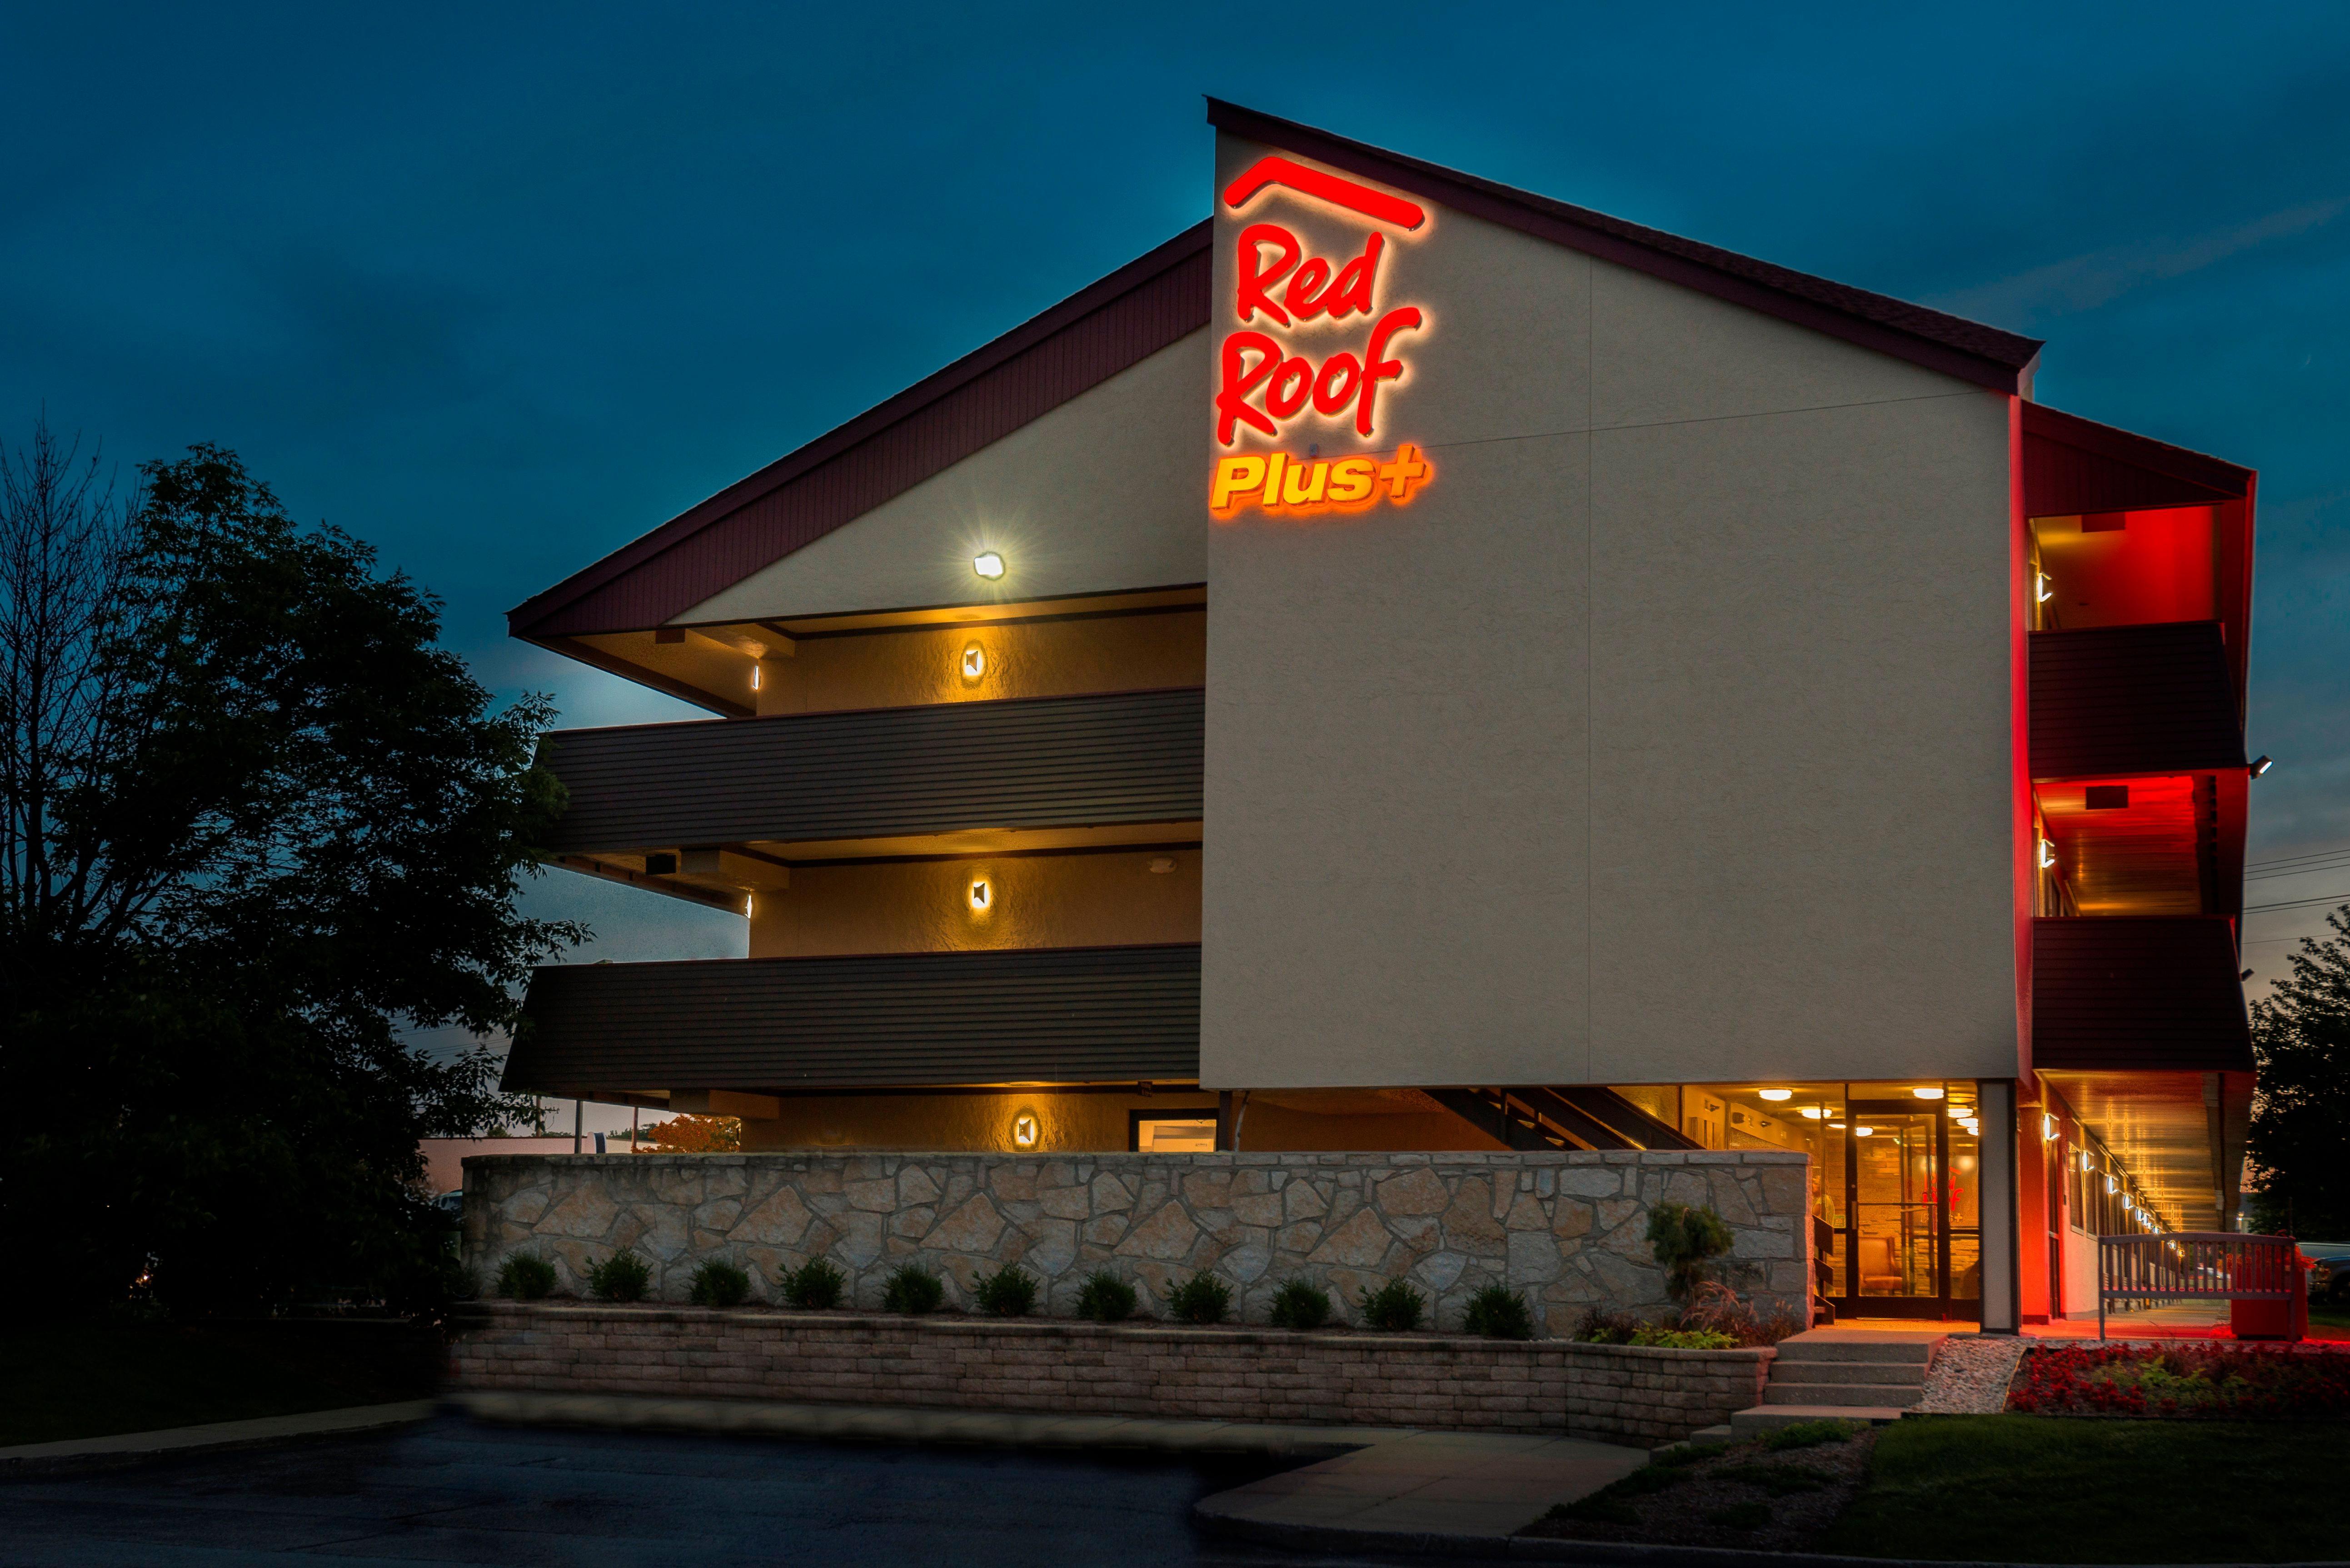 Red Roof Inn Plus+ Chicago - Naperville Exterior photo